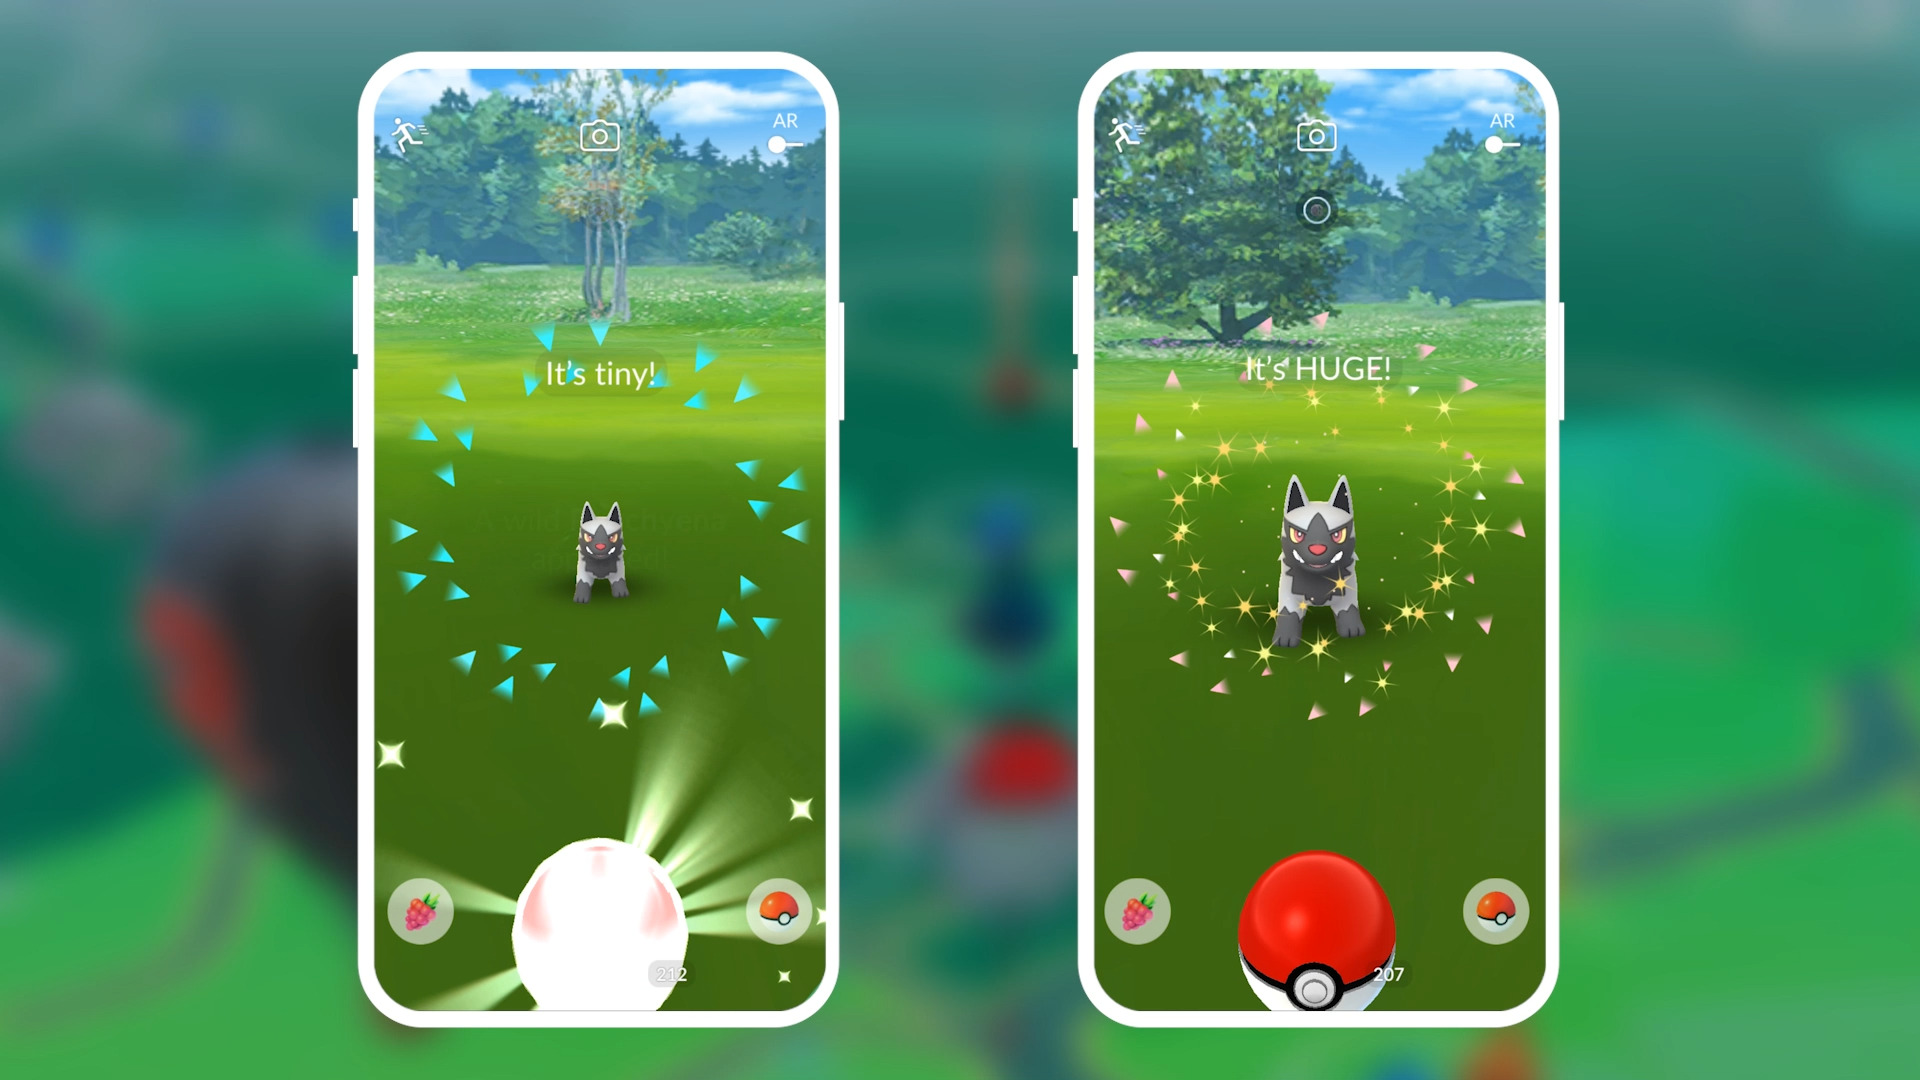 New Pokémon sizes have been discovered in Pokémon GO!